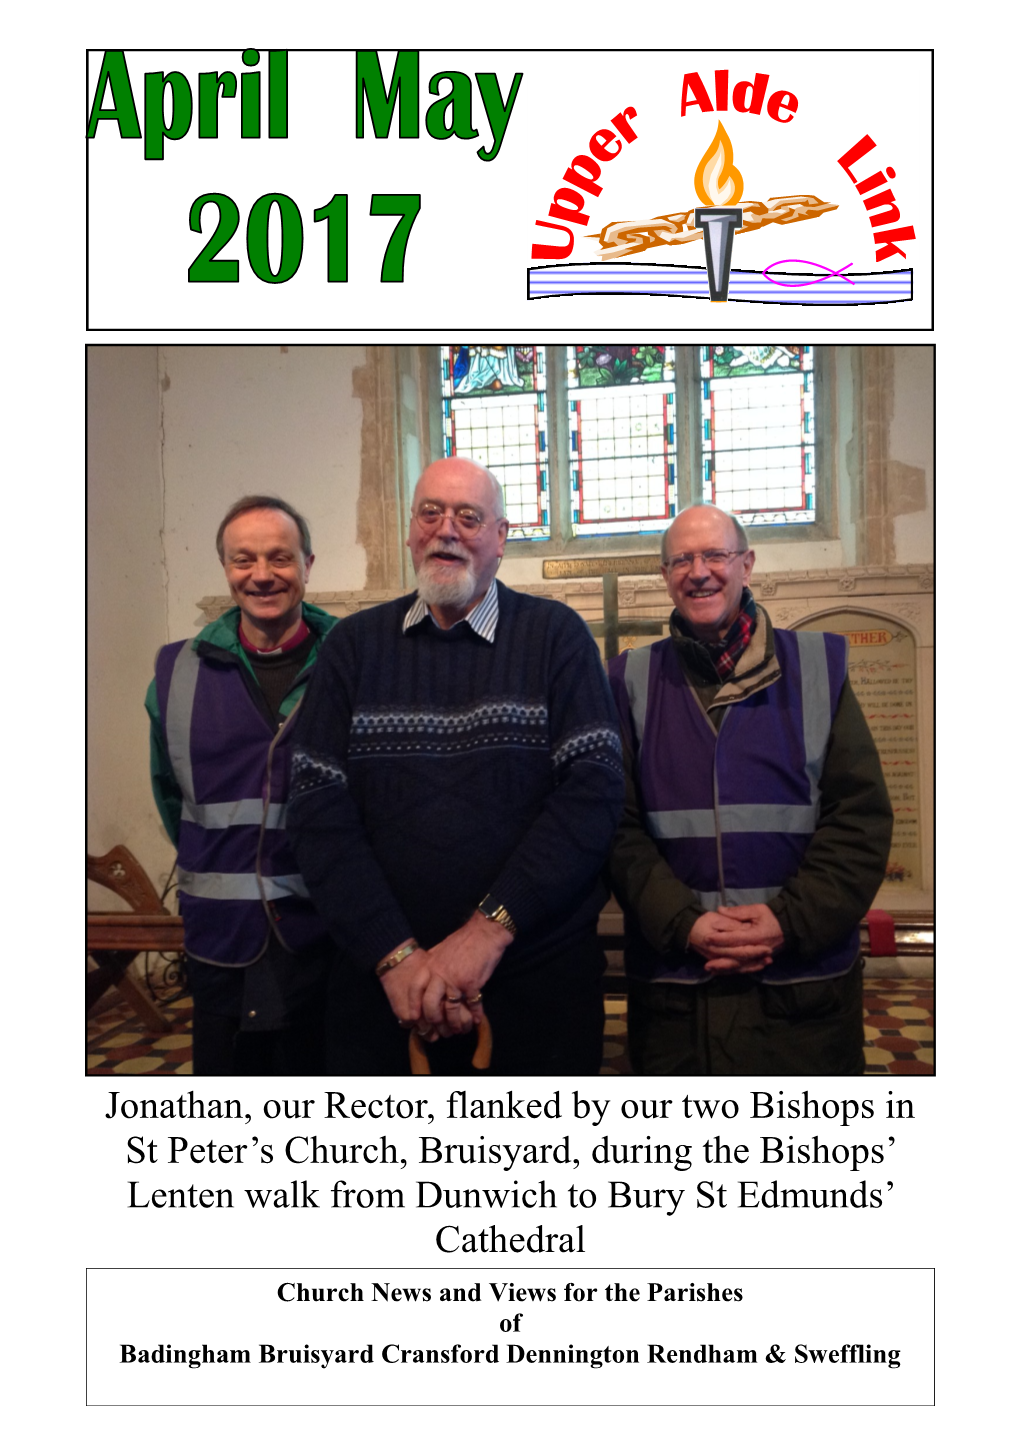 Jonathan, Our Rector, Flanked by Our Two Bishops in St Peter's Church, Bruisyard, During the Bishops' Lenten Walk from Dunwi